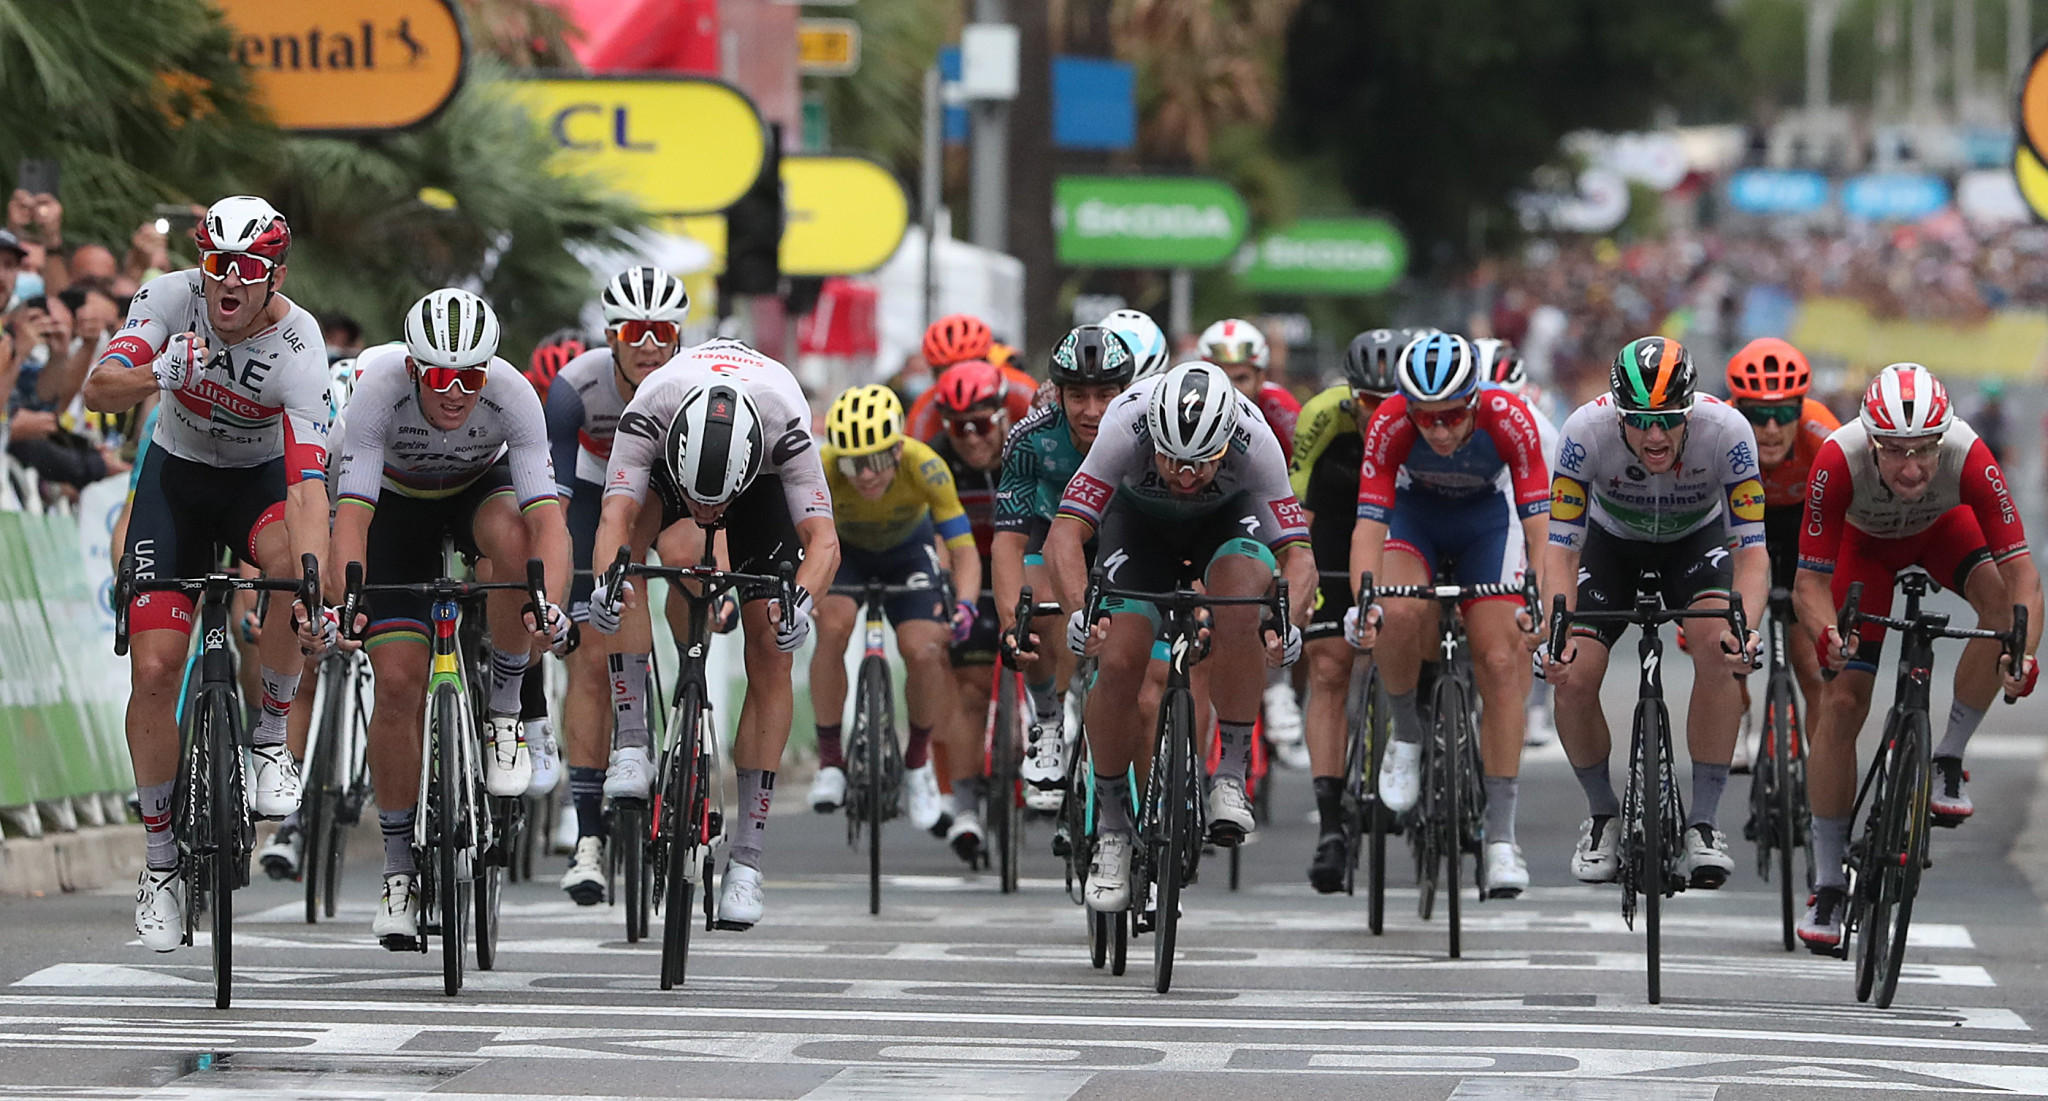 Alexander Kristoff, left, sprinted to victory on the first stage of the Tour de France ©Getty Images